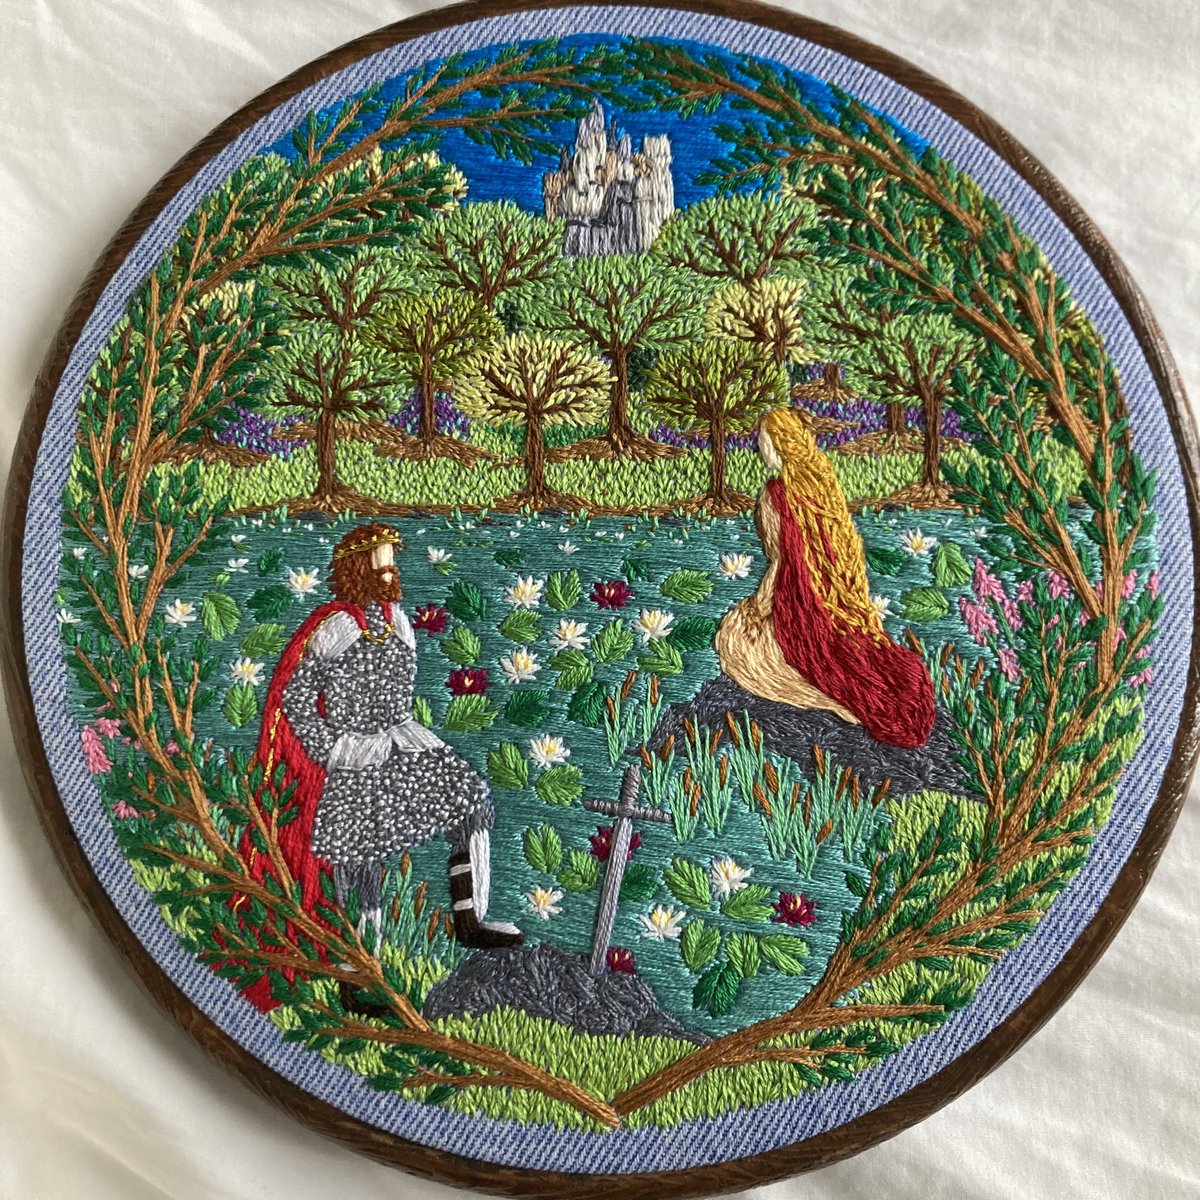 At last the needle is down on my latest embroidery. I hope it was worth the wait! 😉 You can probably guess what my inspiration was for this one, but let your imaginations run wild…🧵🪡🌿🪷
*all freehand stitched without pattern, paint or sketch. #stitchedart #thesewingsongbird